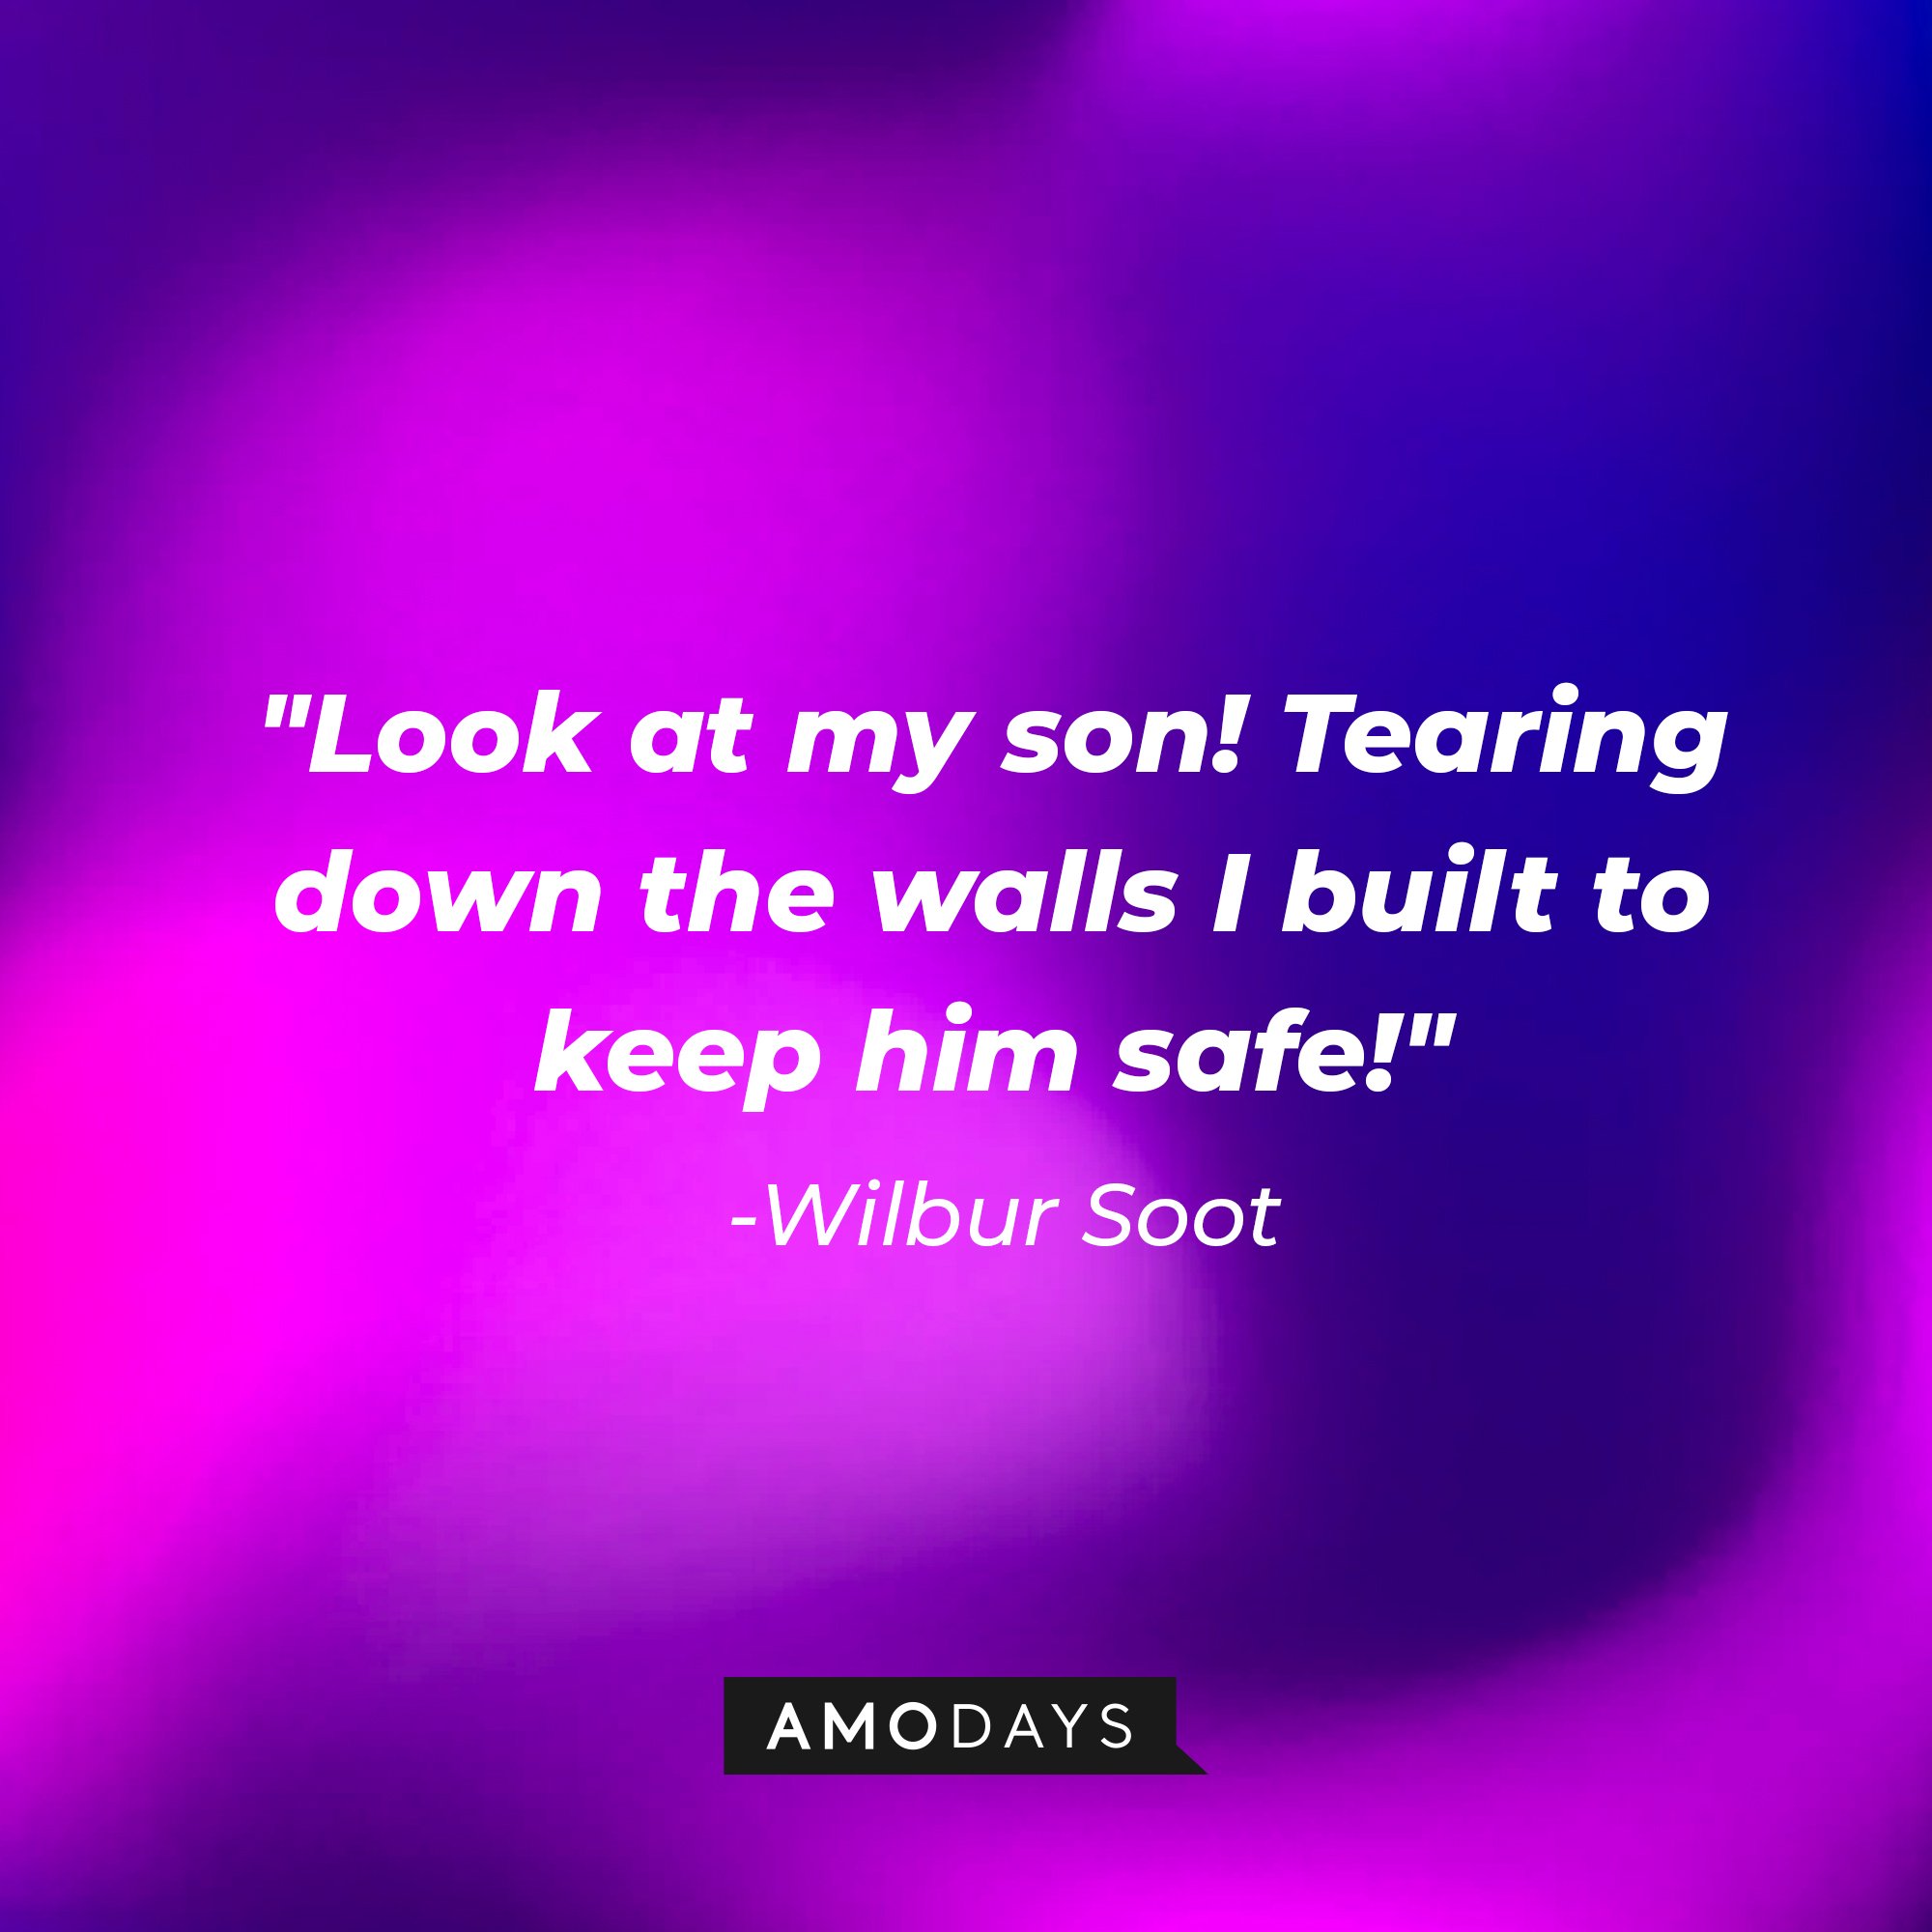 Wilbur Soot's quote: "Look at my son! Tearing down the walls I built to keep him safe!" | Image: AmoDays